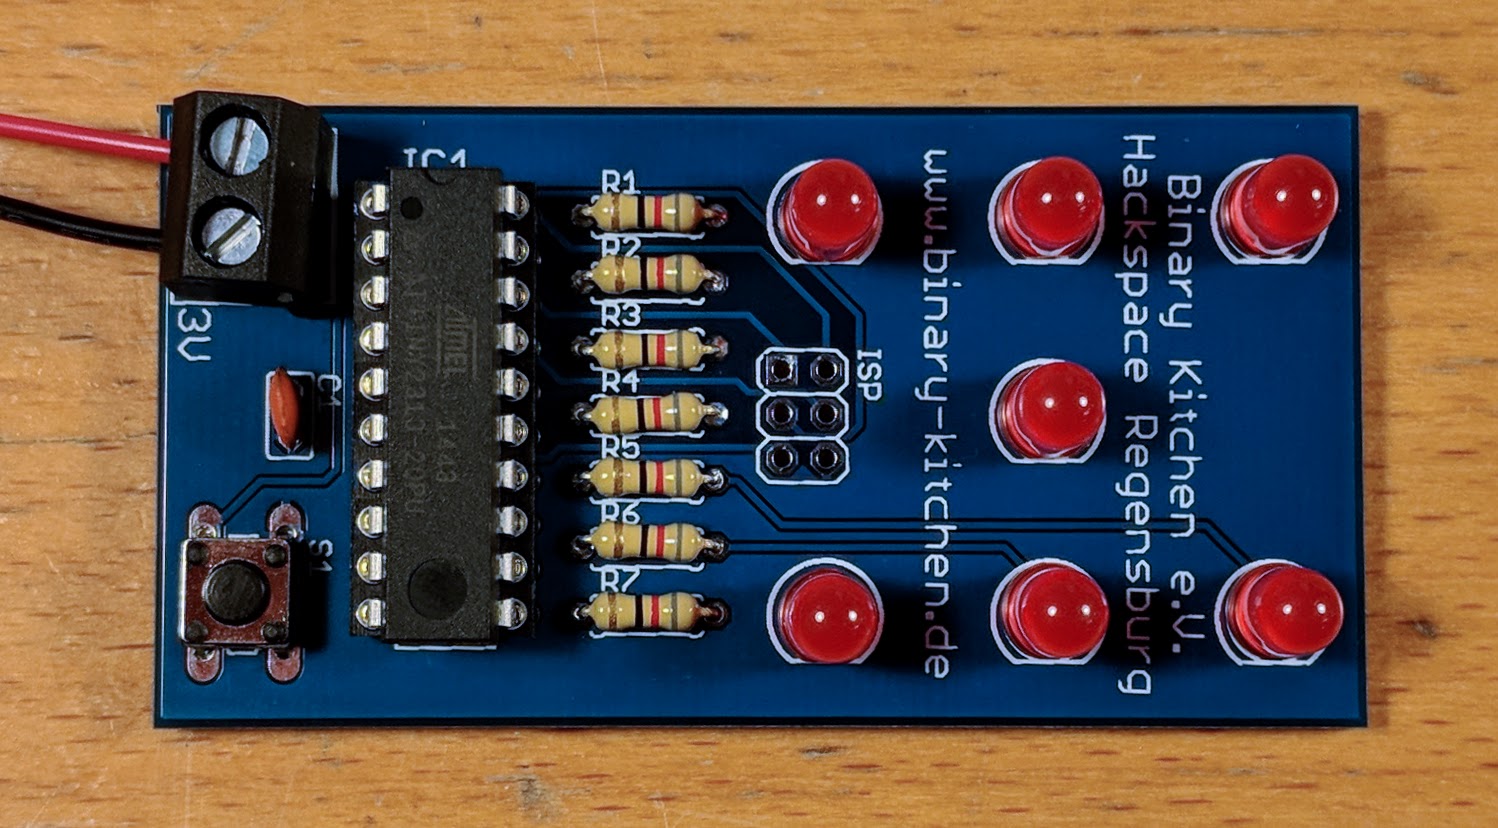 Dice with Microcontroller - A simple dice kit ideal for beginners